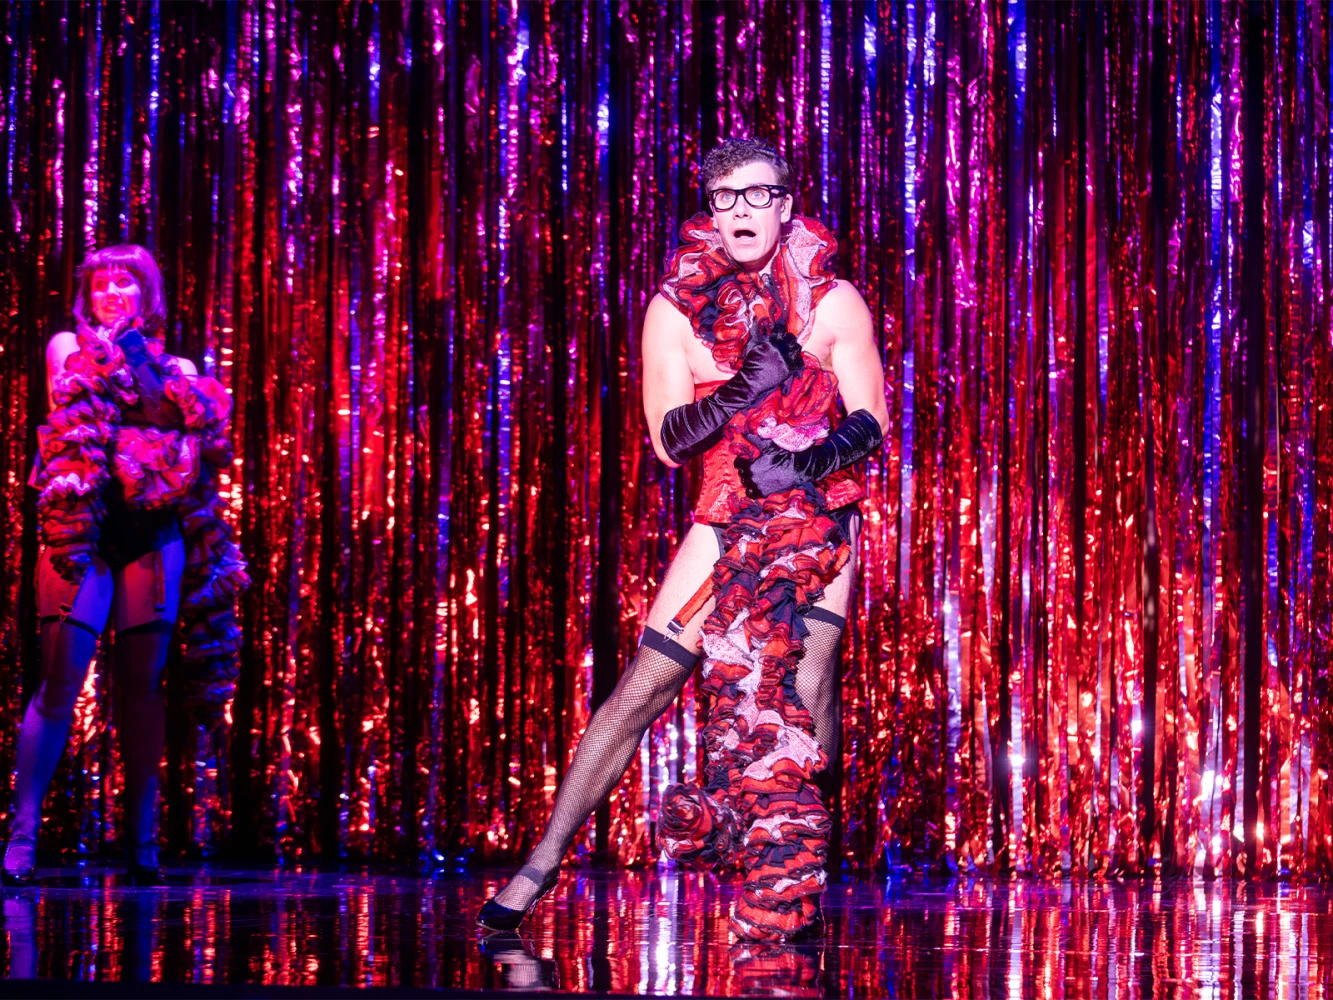 The Rocky Horror Show: What to expect - 5